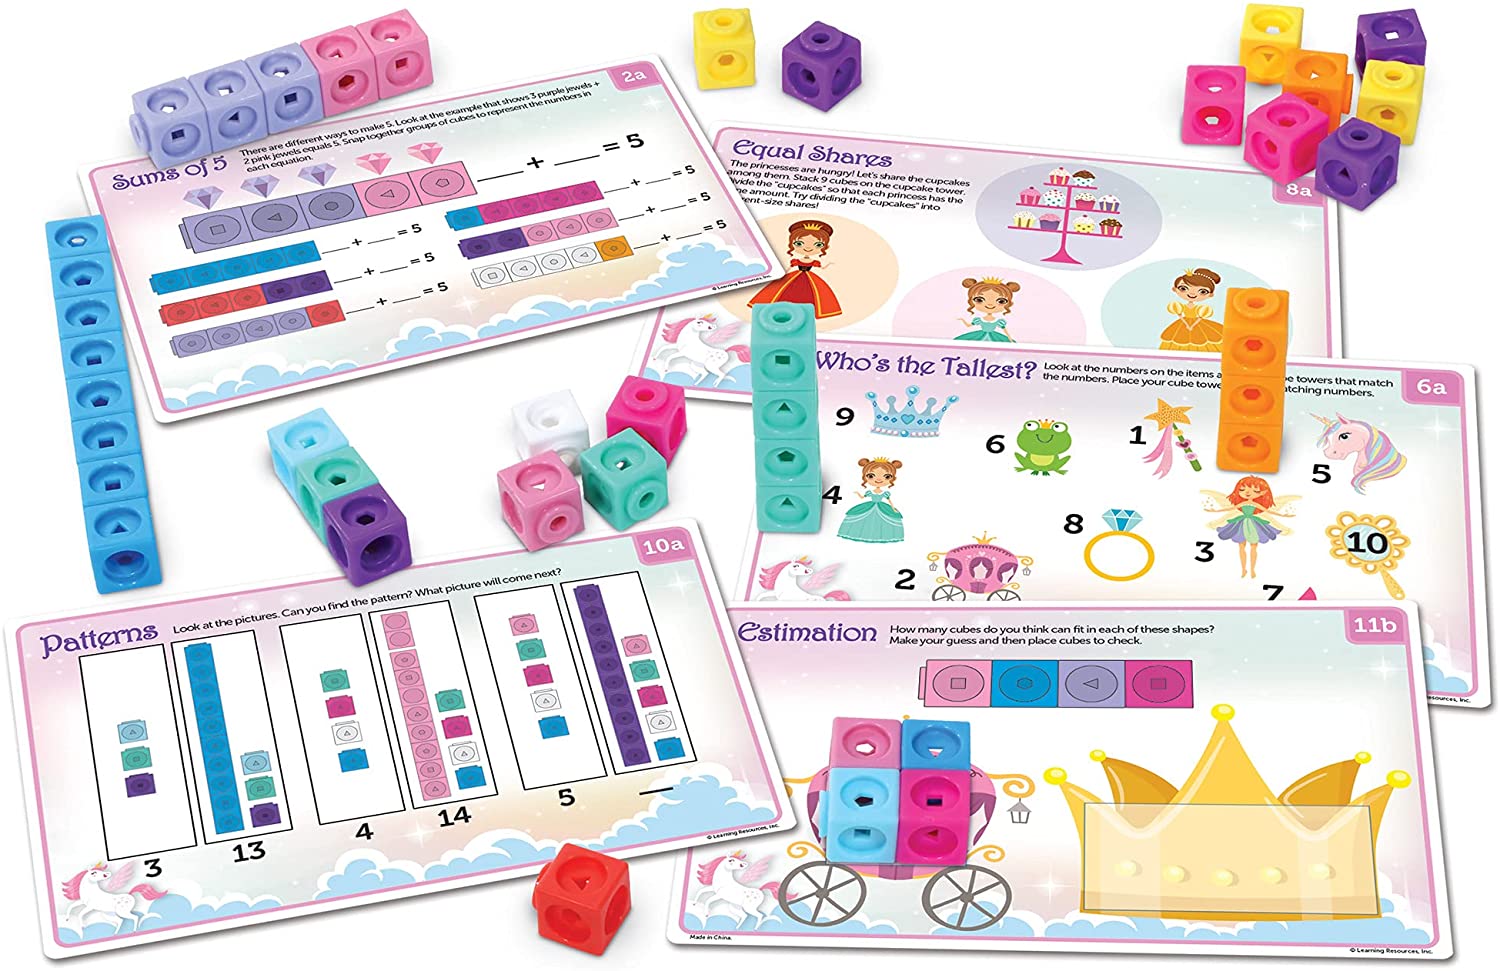 Let's Build Numberblocks Mathlink Cubes Zero to Ten by Learning Resources